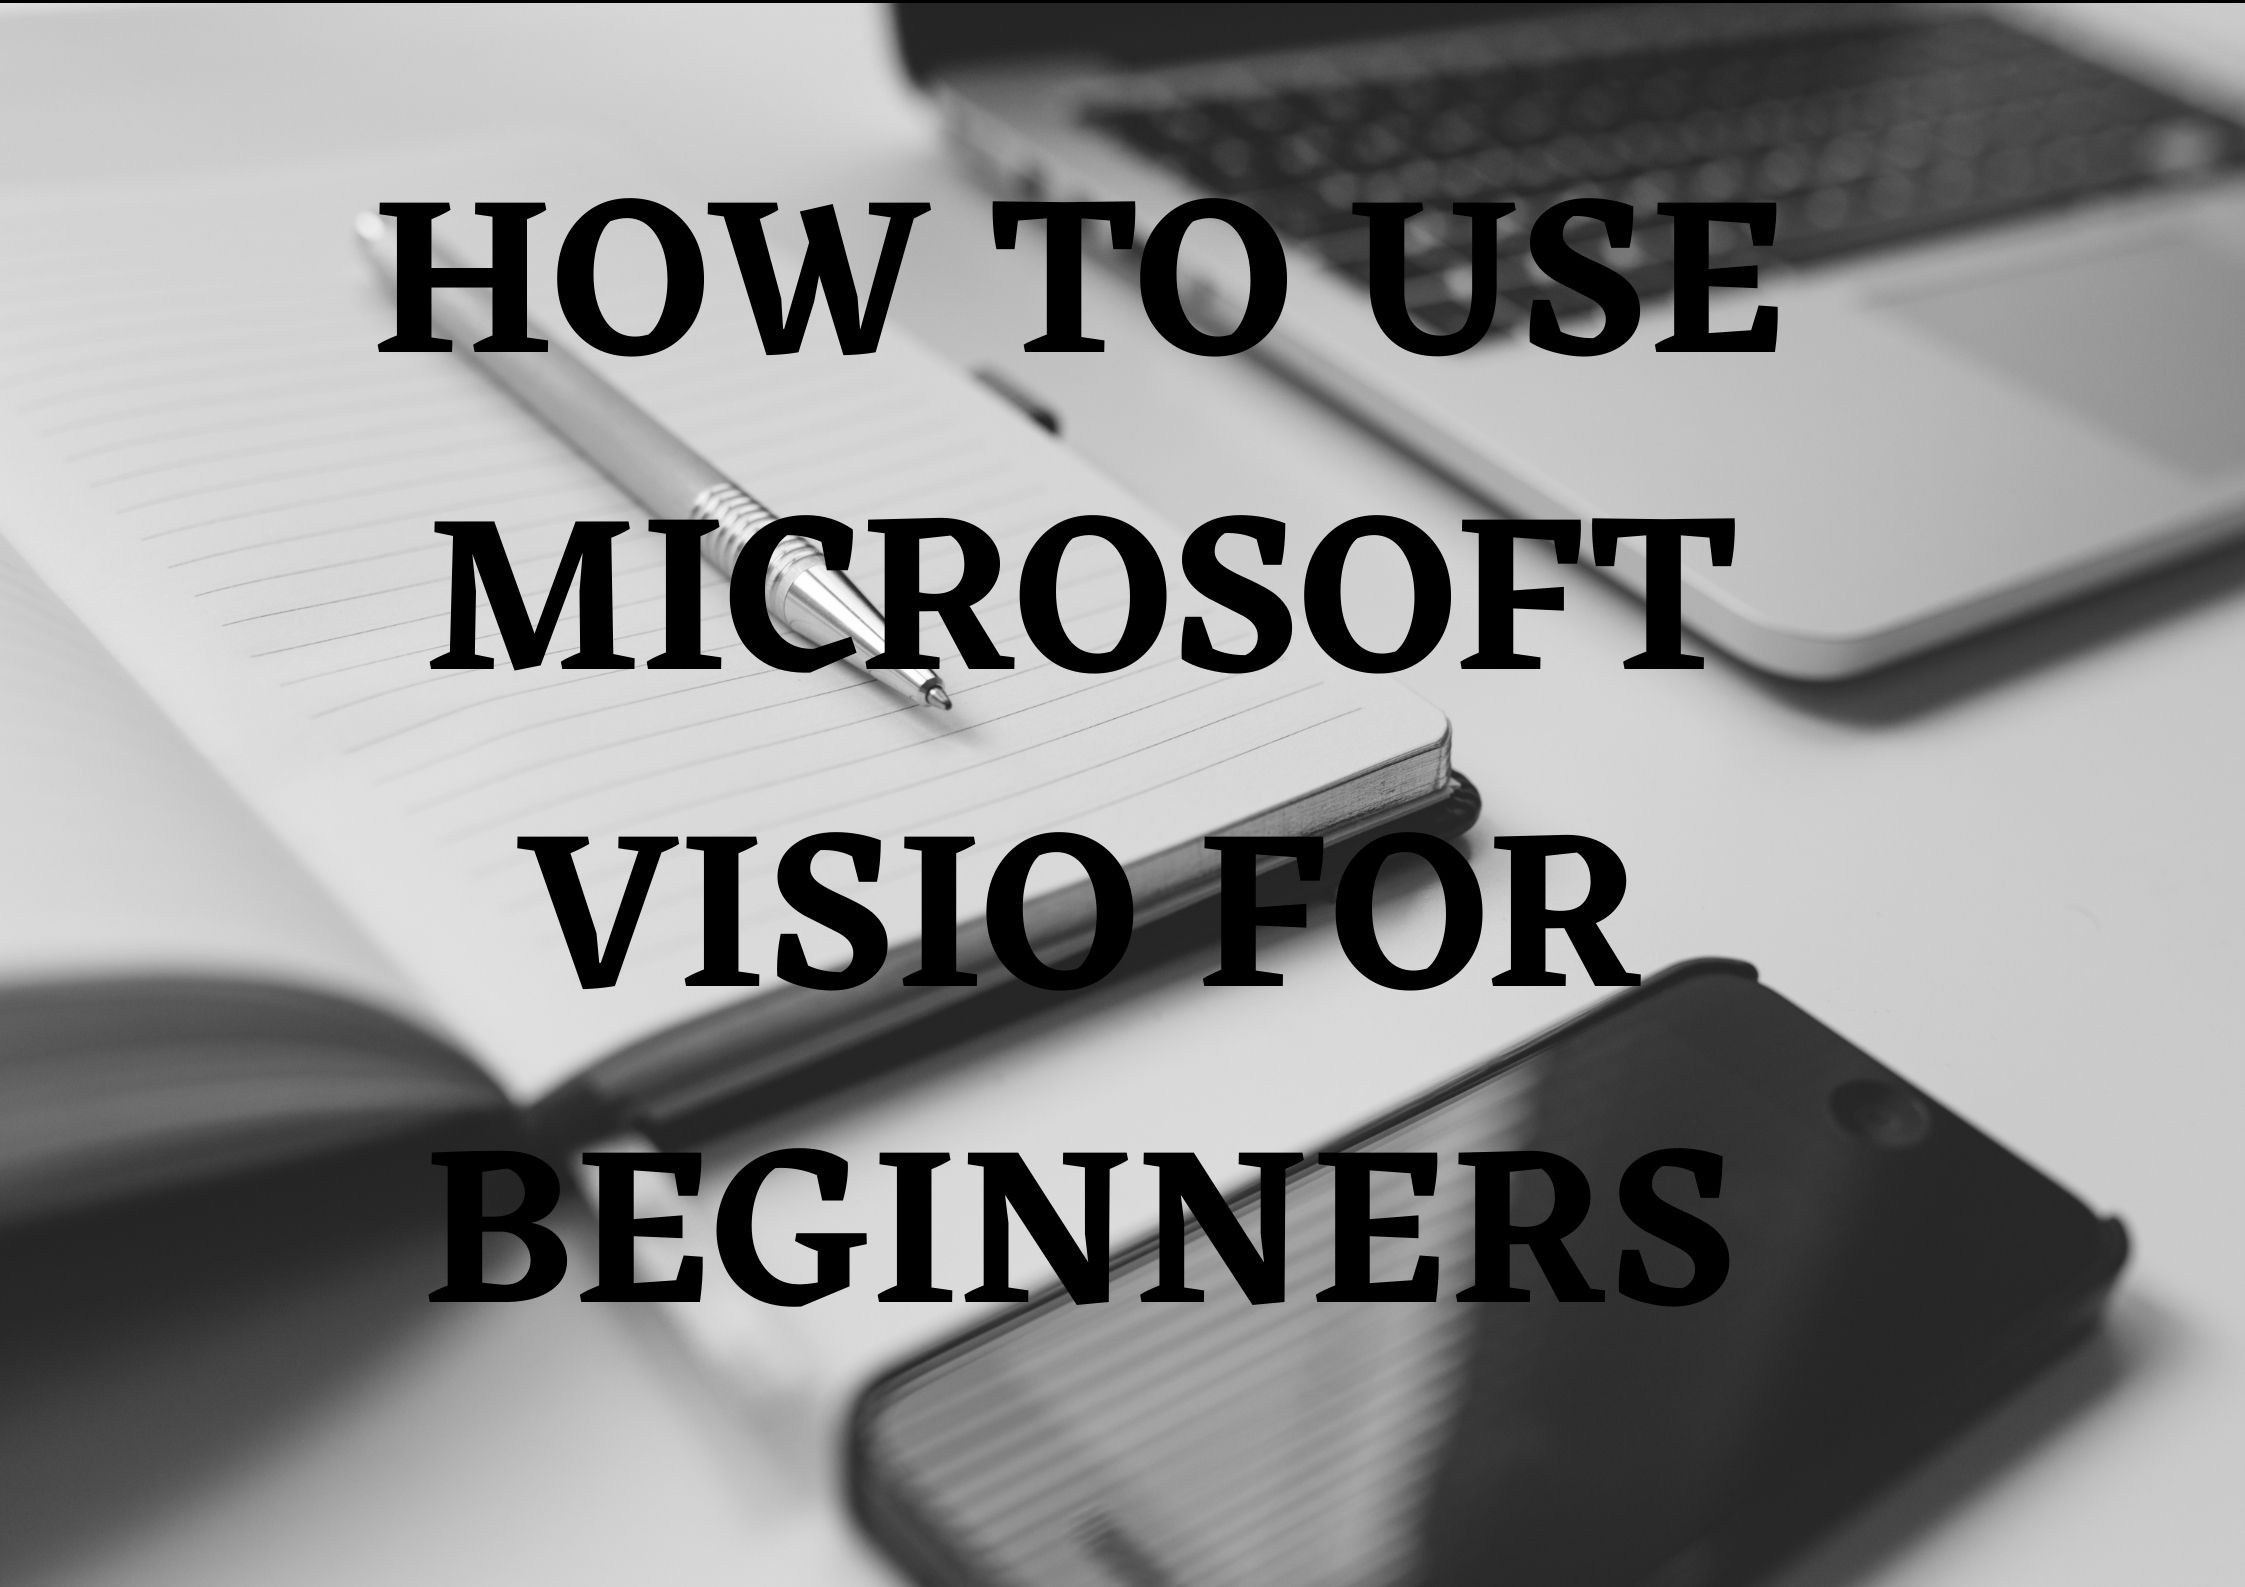 HOW TO USE MICROSOFT VISIO FOR BEGINNERS.jpg